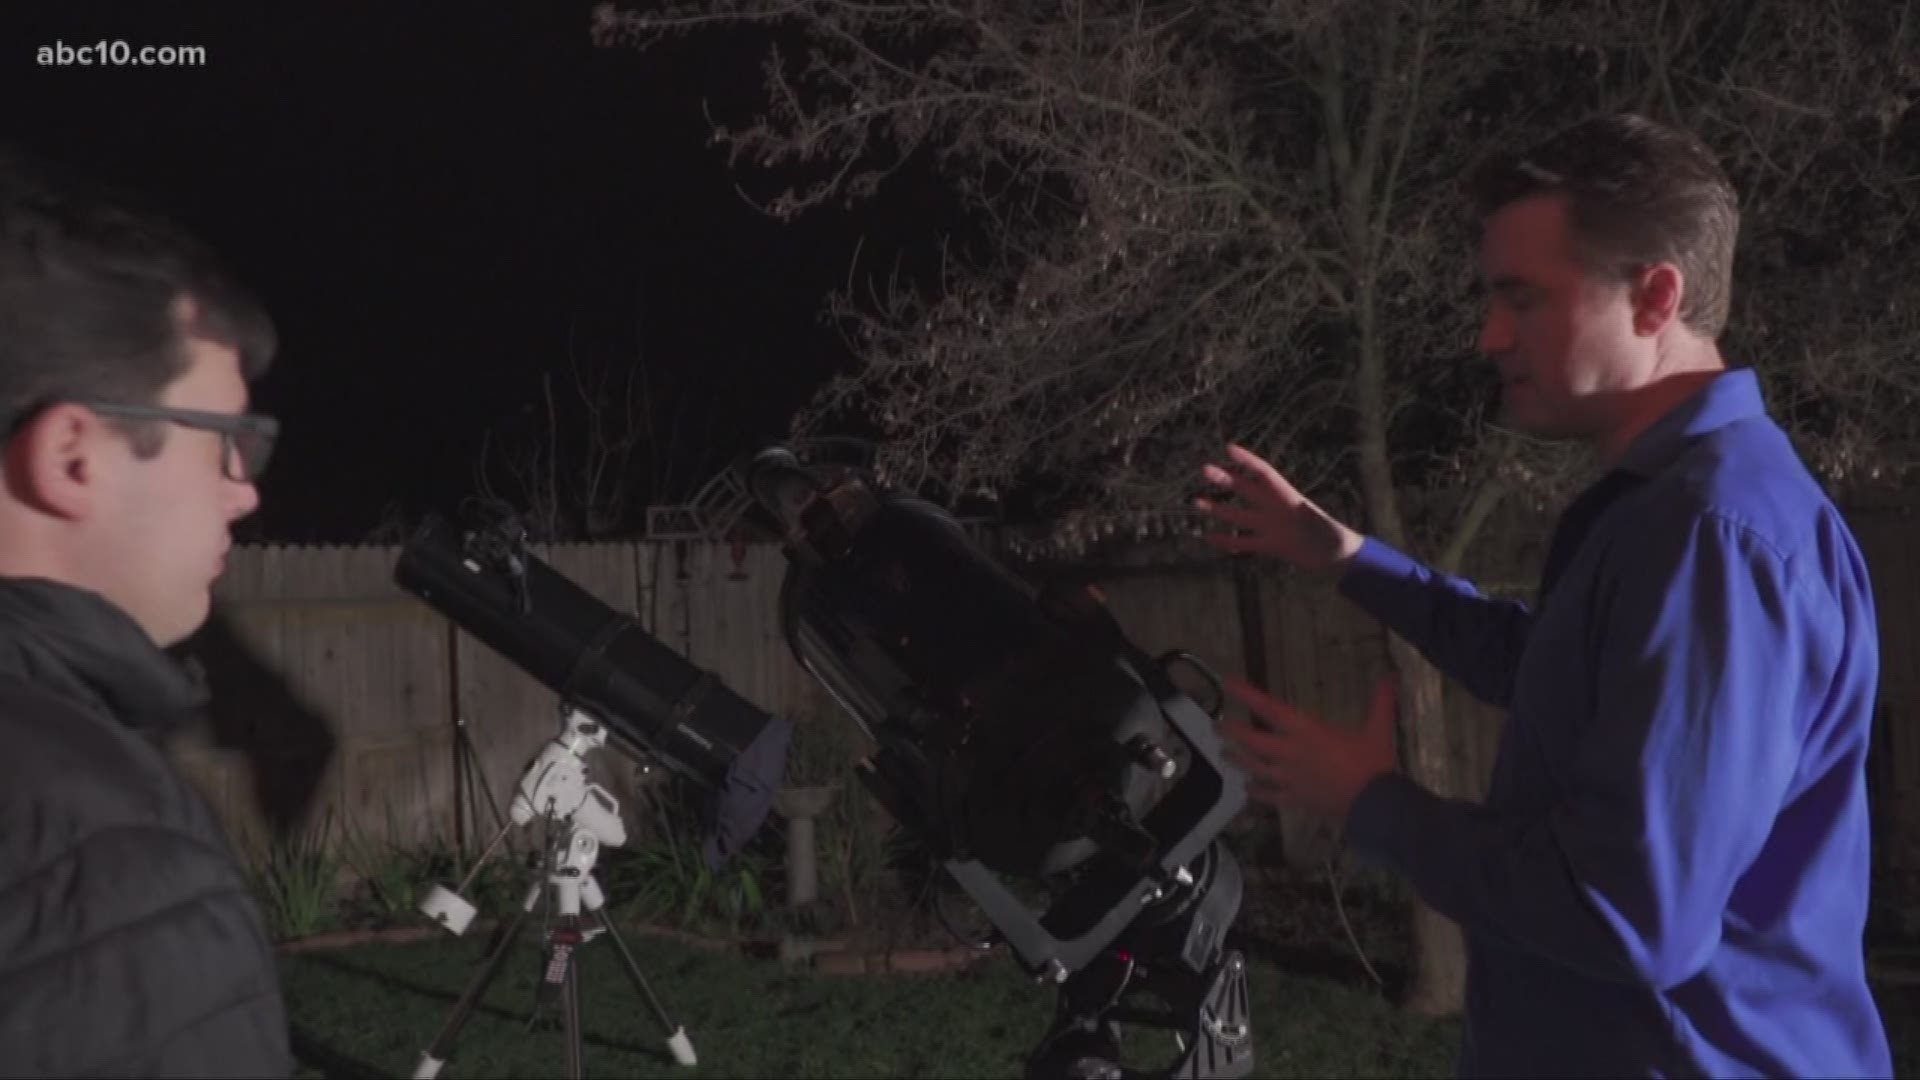 The amateur photographer, who now lives in Elk Grove, started taking composite images of the night skies several years ago, but his love for astronomy began when he was a child.